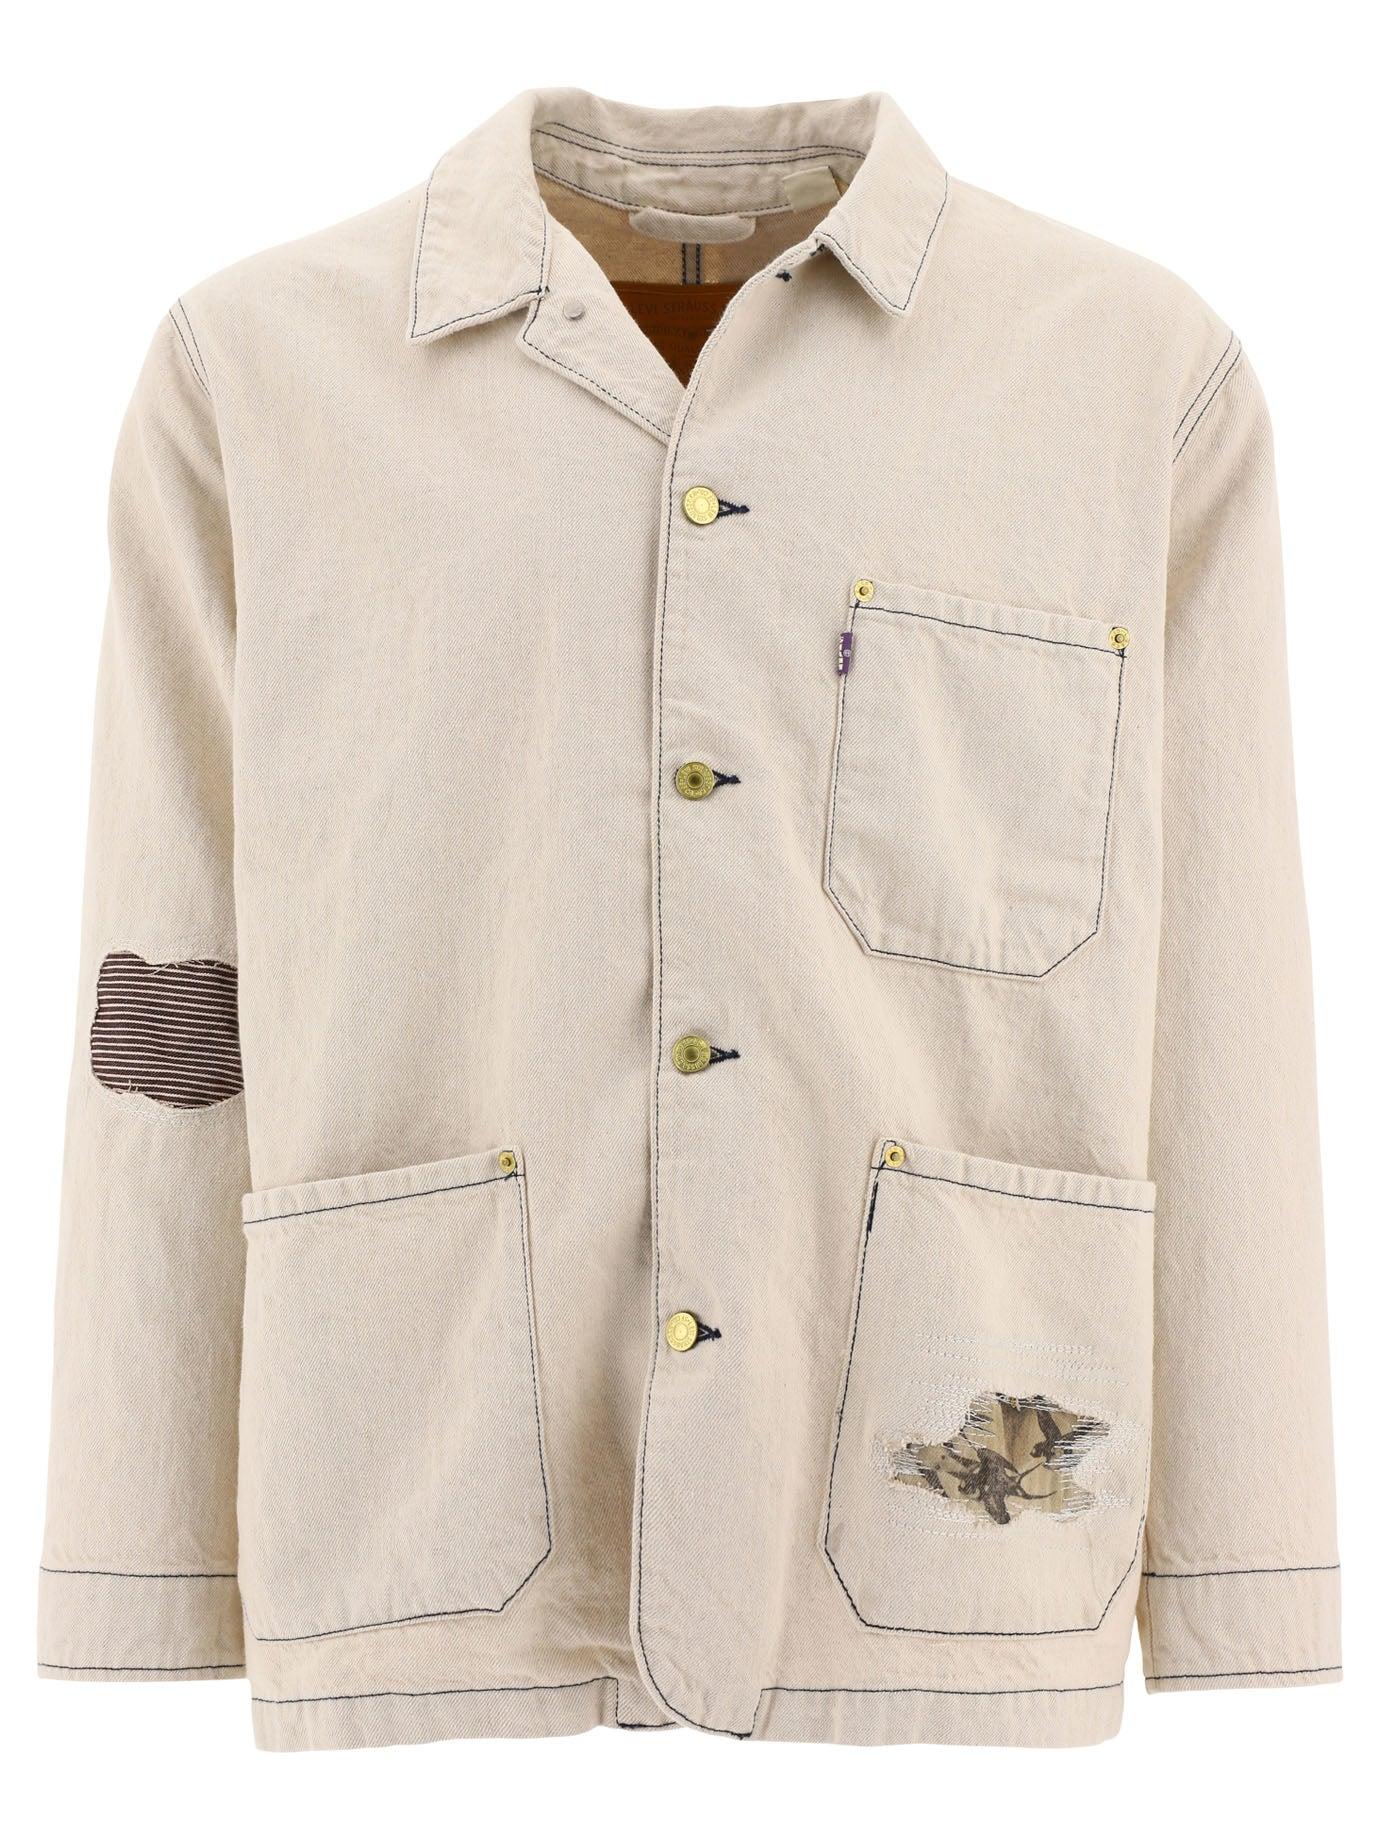 Levi's Jacket With Patchwork in Beige (Natural) for Men - Save 34% | Lyst